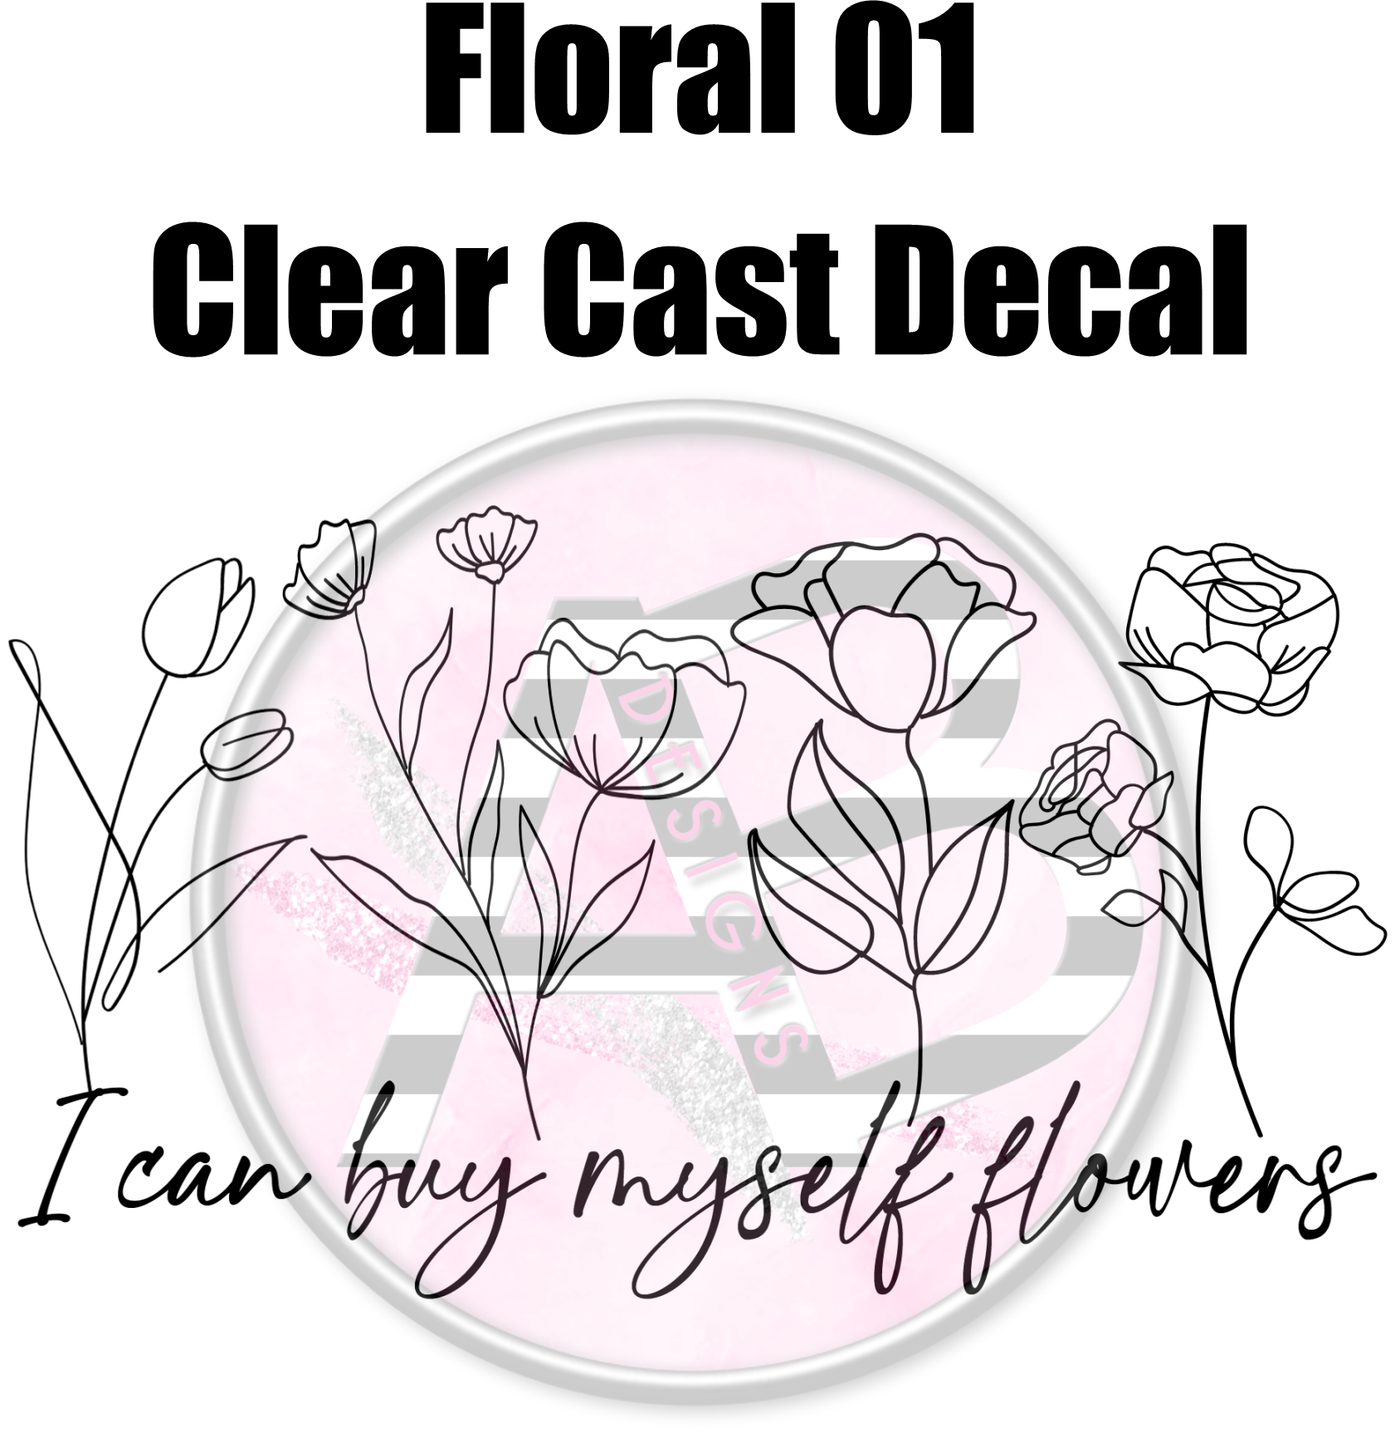 Floral 01 - Clear Cast Decal